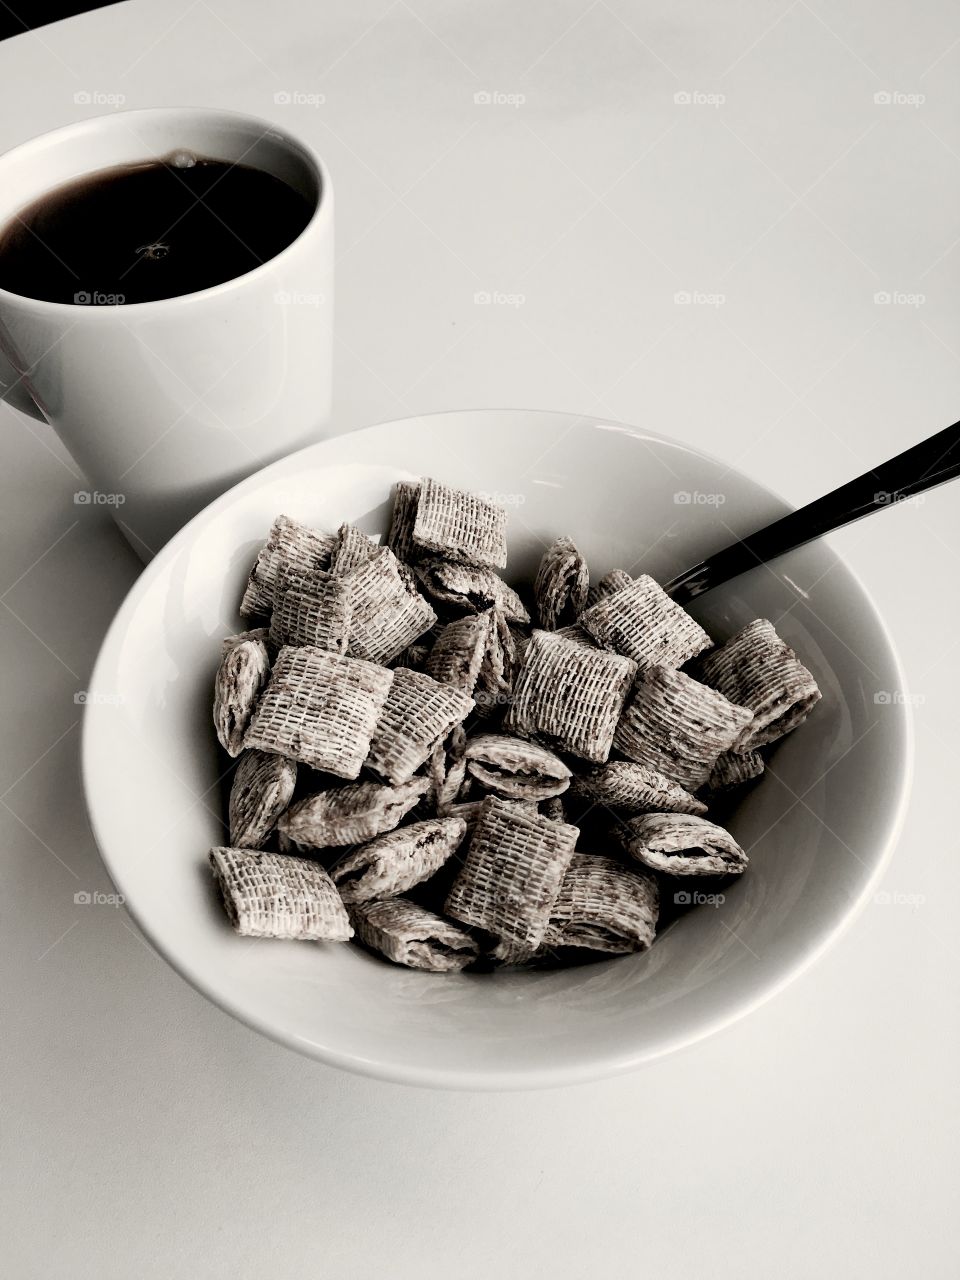 Breakfast coffee and cereal 